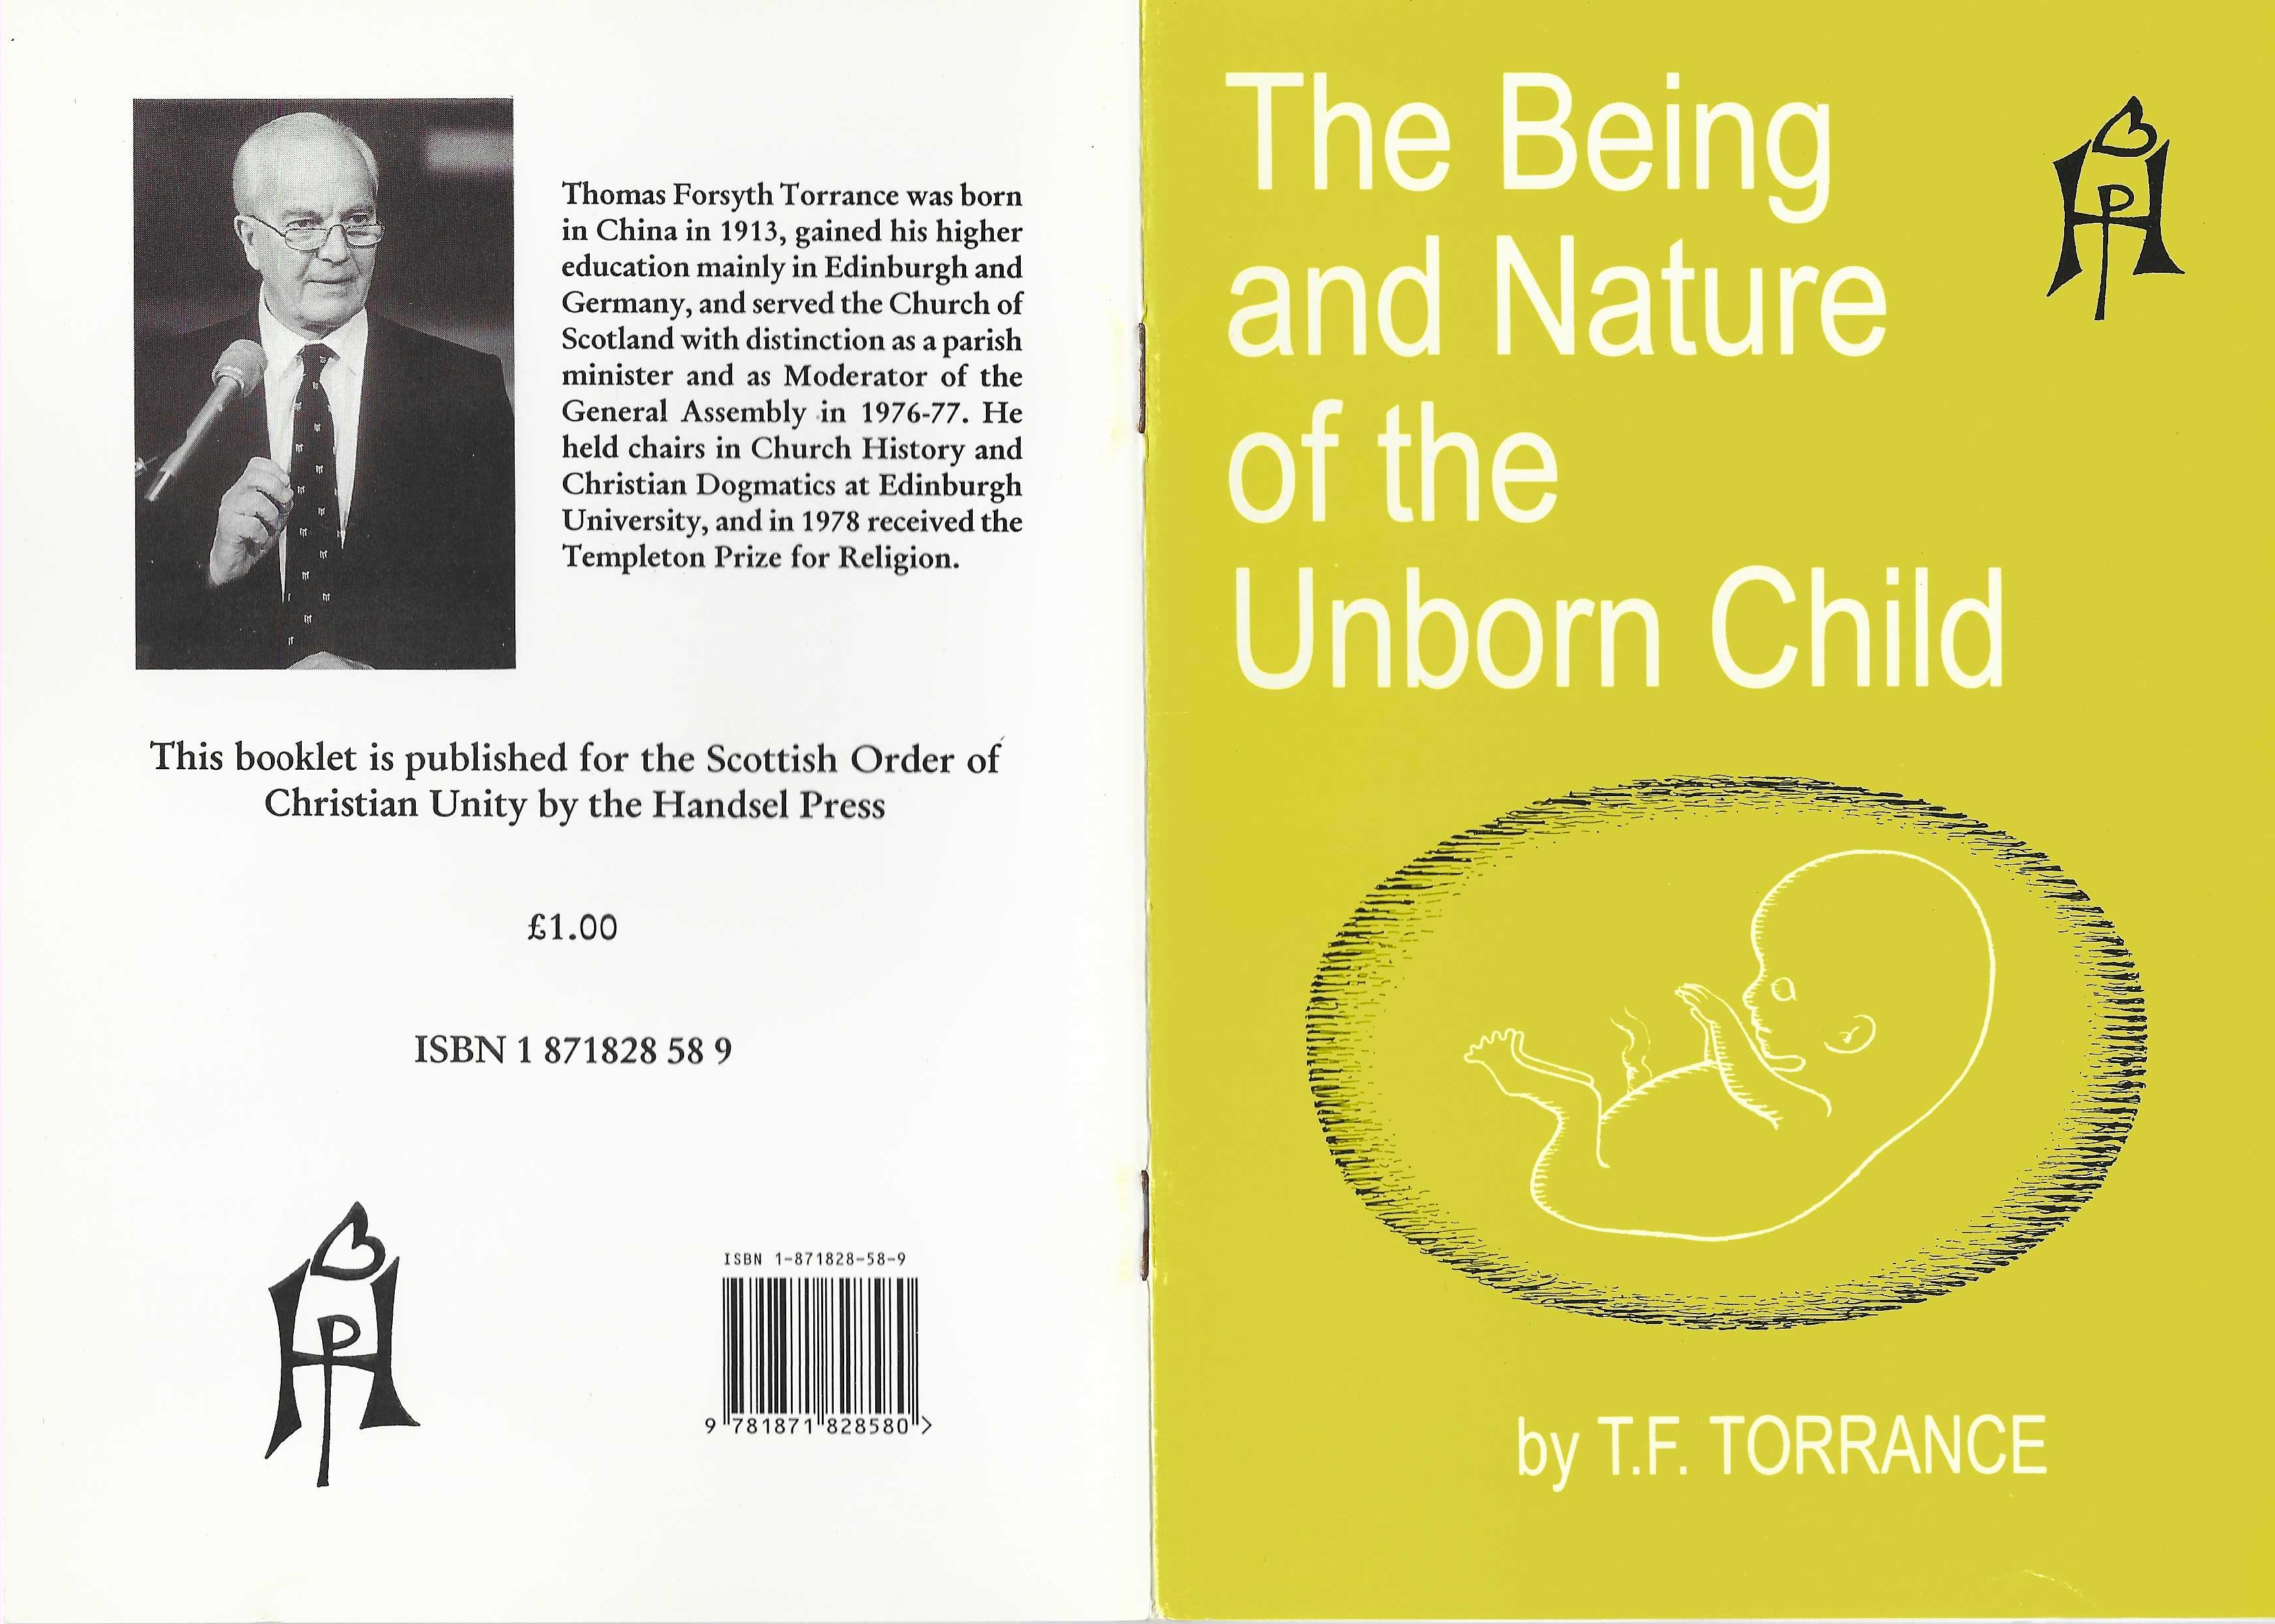 2000-TFT-11 covers